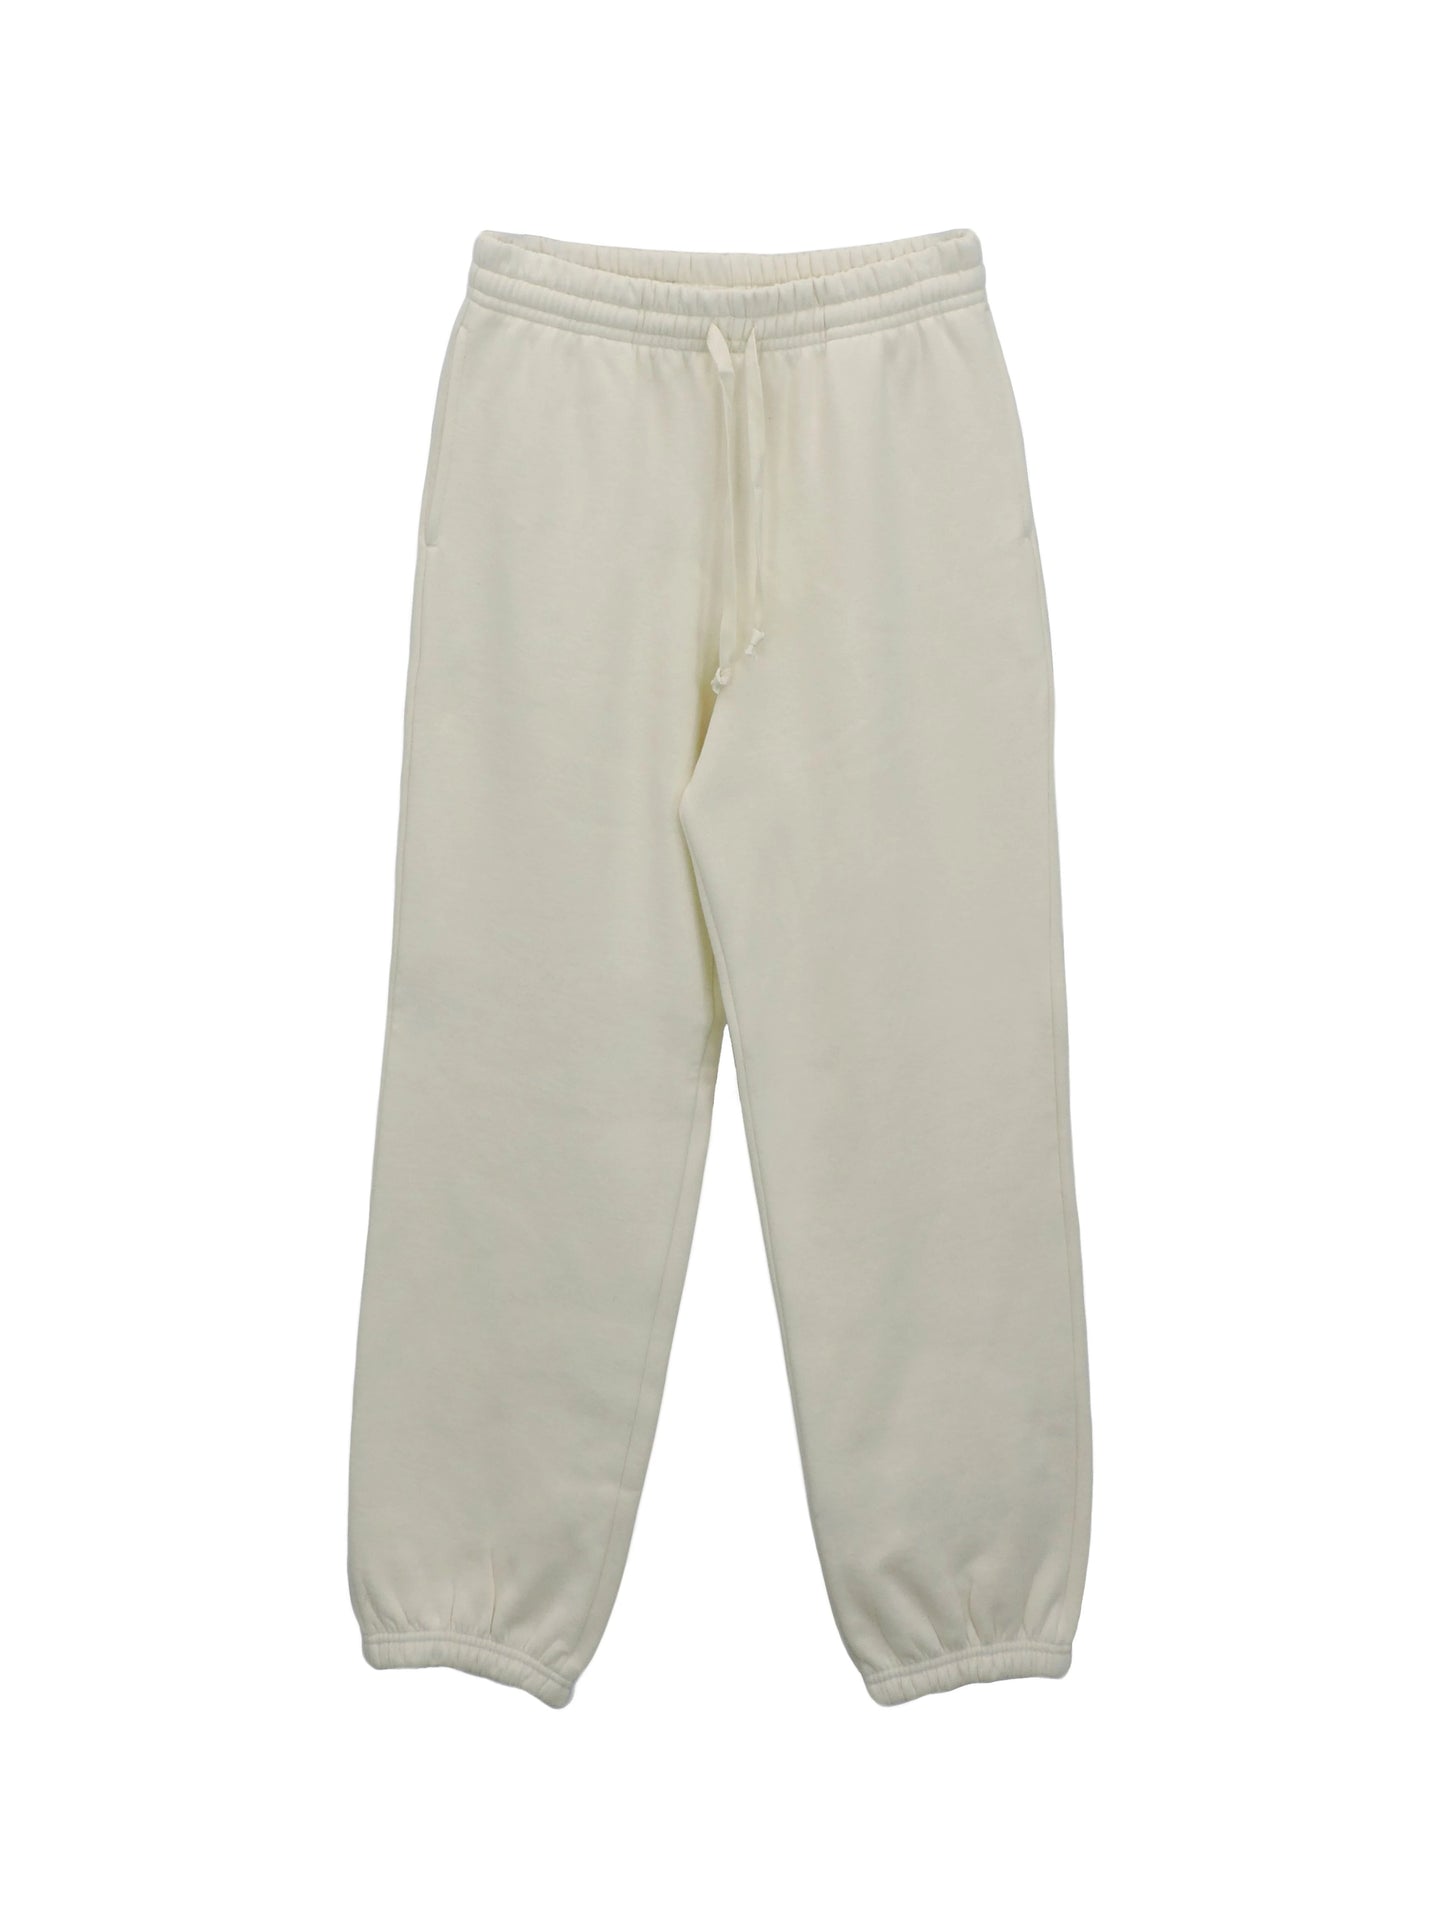 Natural Colored Fleece Sweatpant with Drawstrings and Loose Fitting Ankle Cuffs